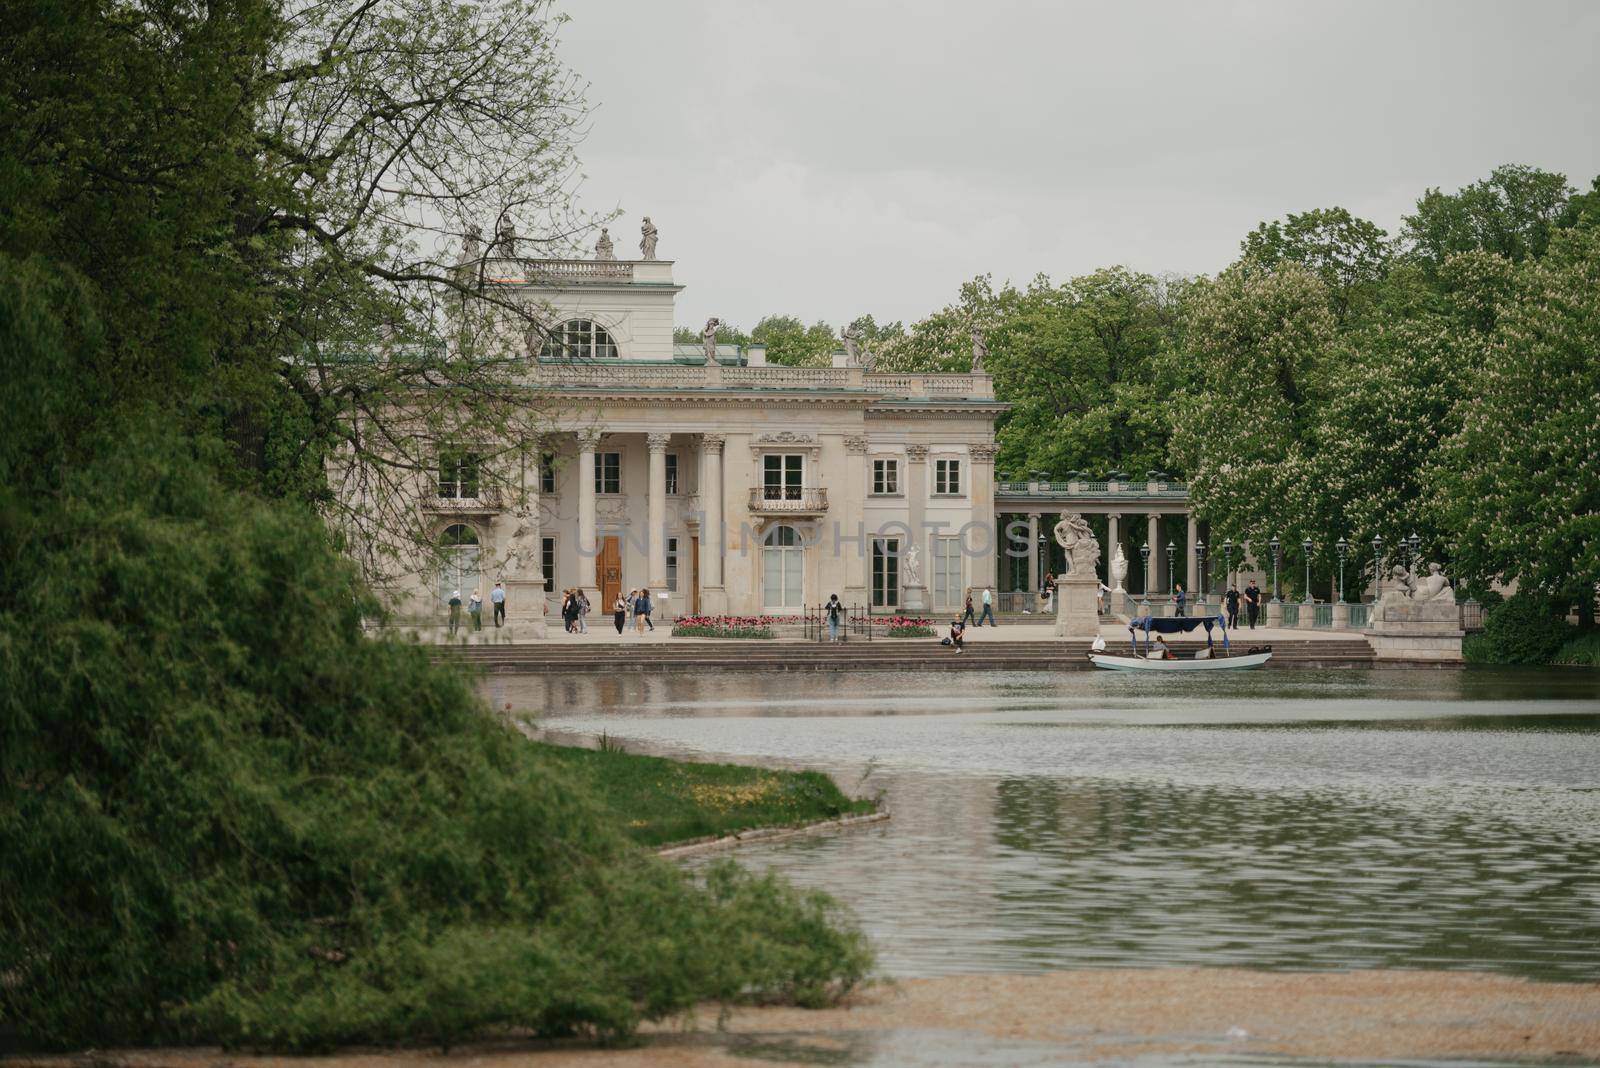 Warsaw, Poland - MAY 12, 2022: The view from the water of the Palace on the Isle at noon